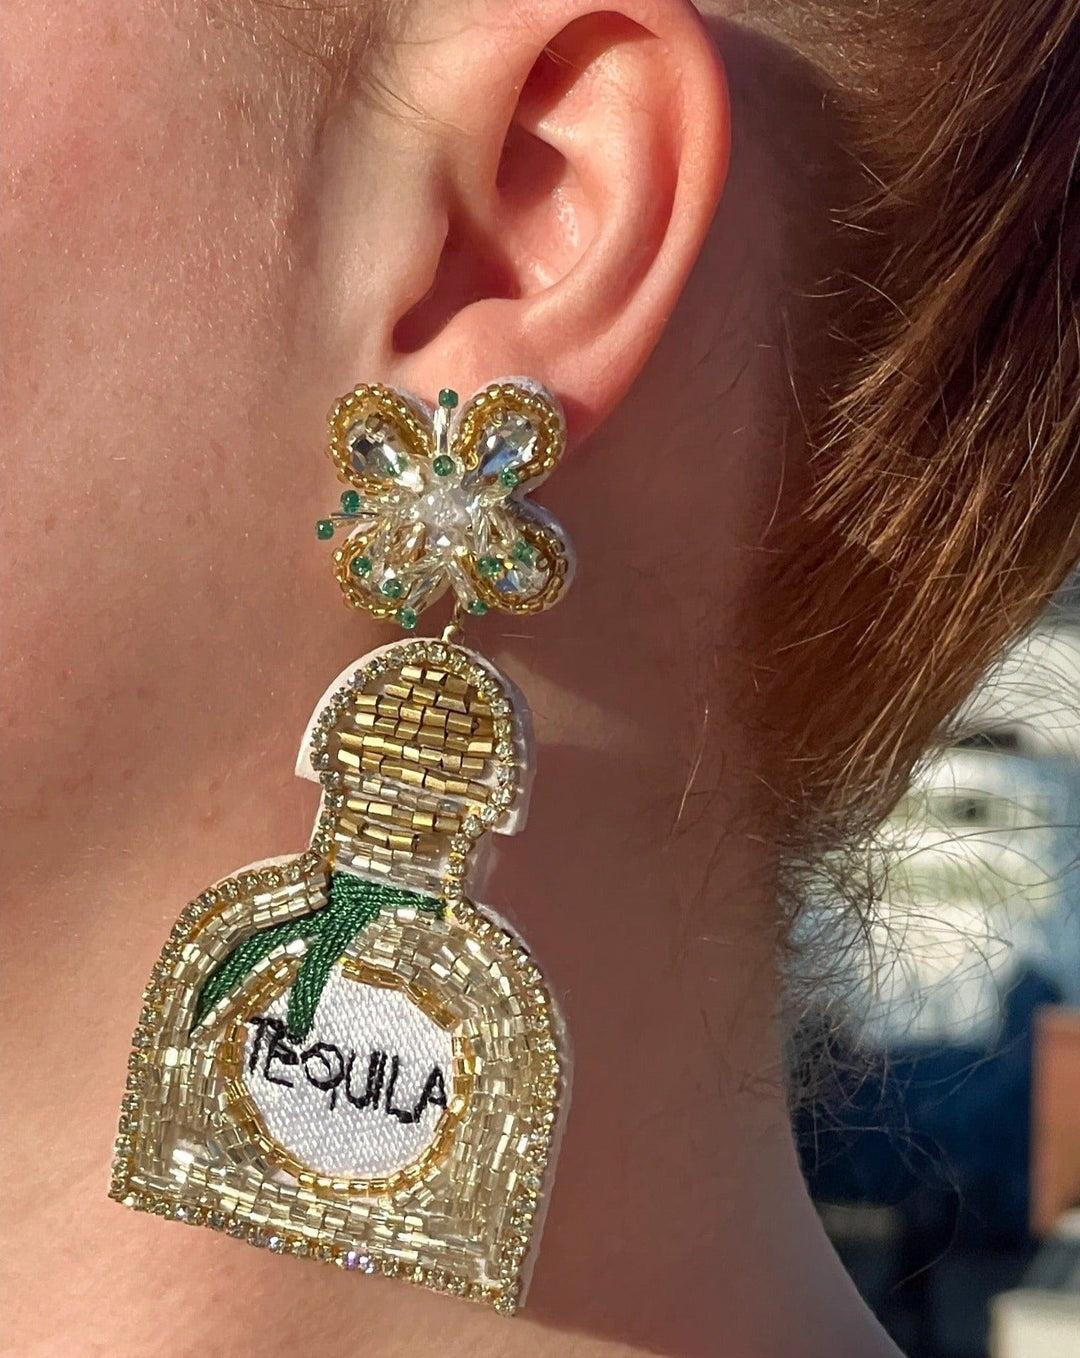 Tequila Makes My Clothes Fall Off Earrings by Meghan Fabulous